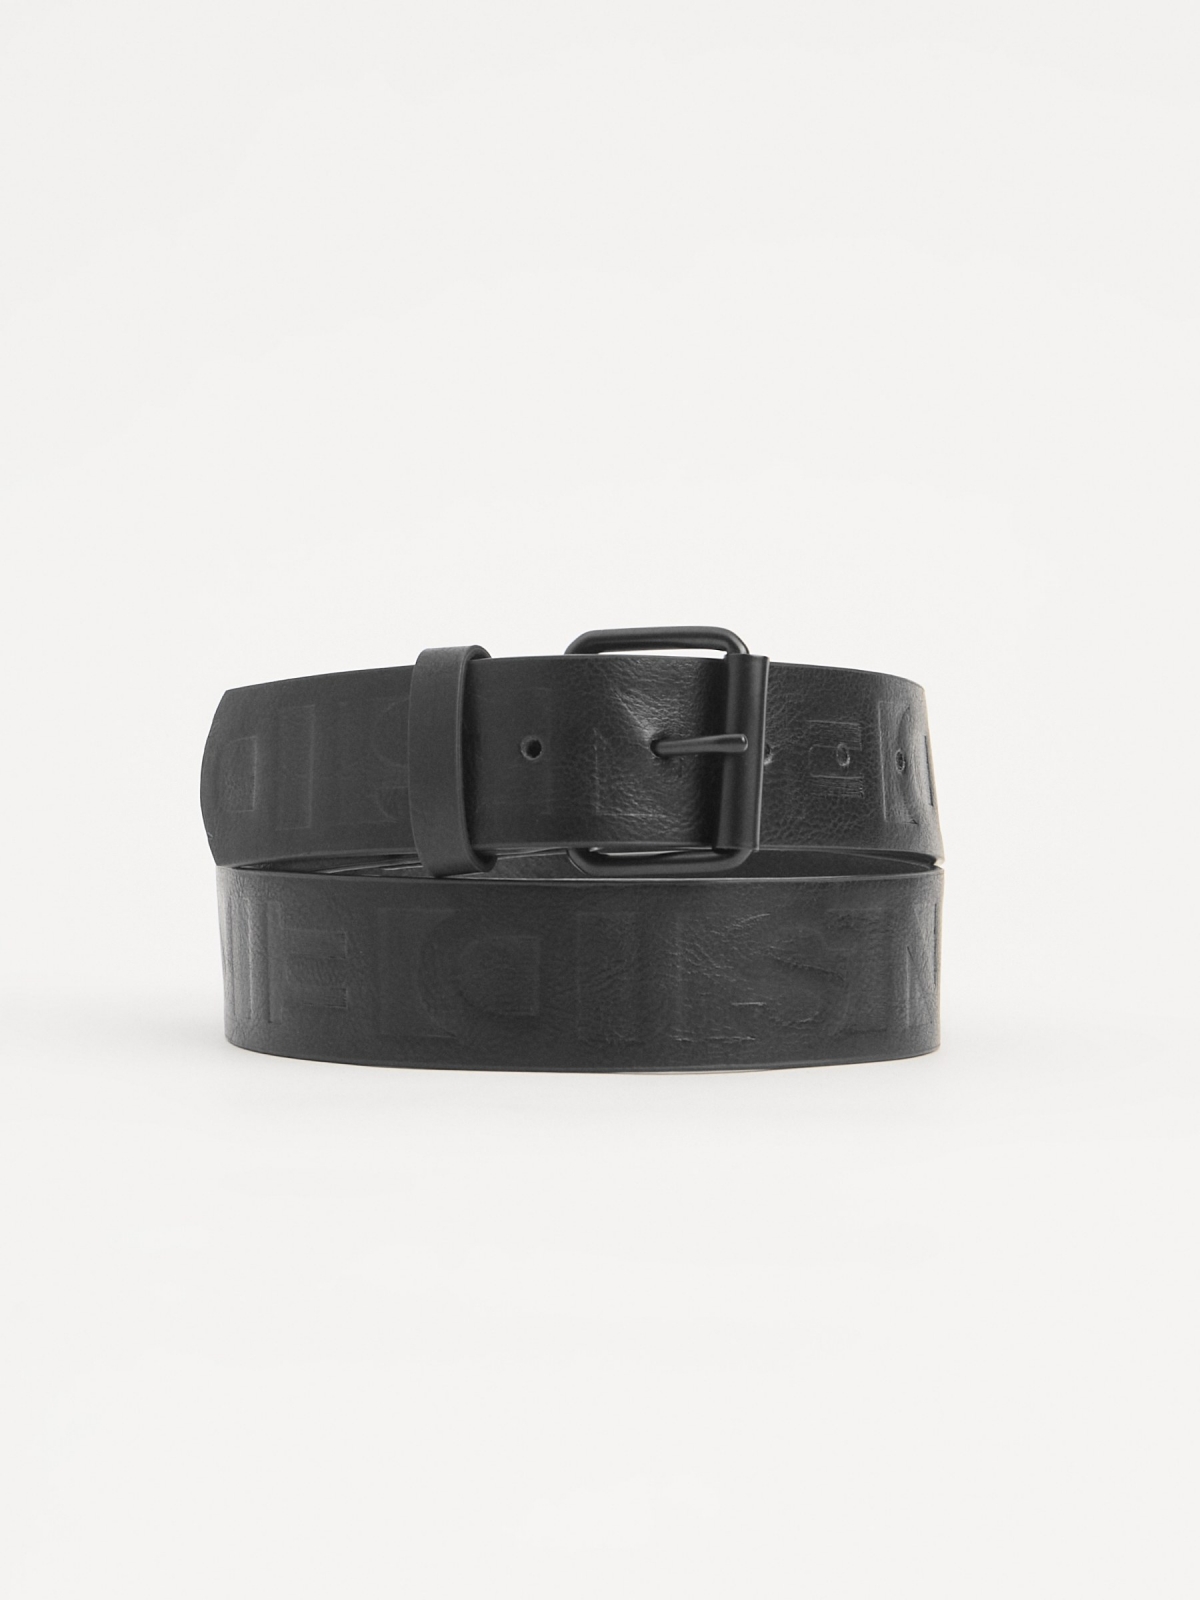 Engraved leather effect belt black detail view